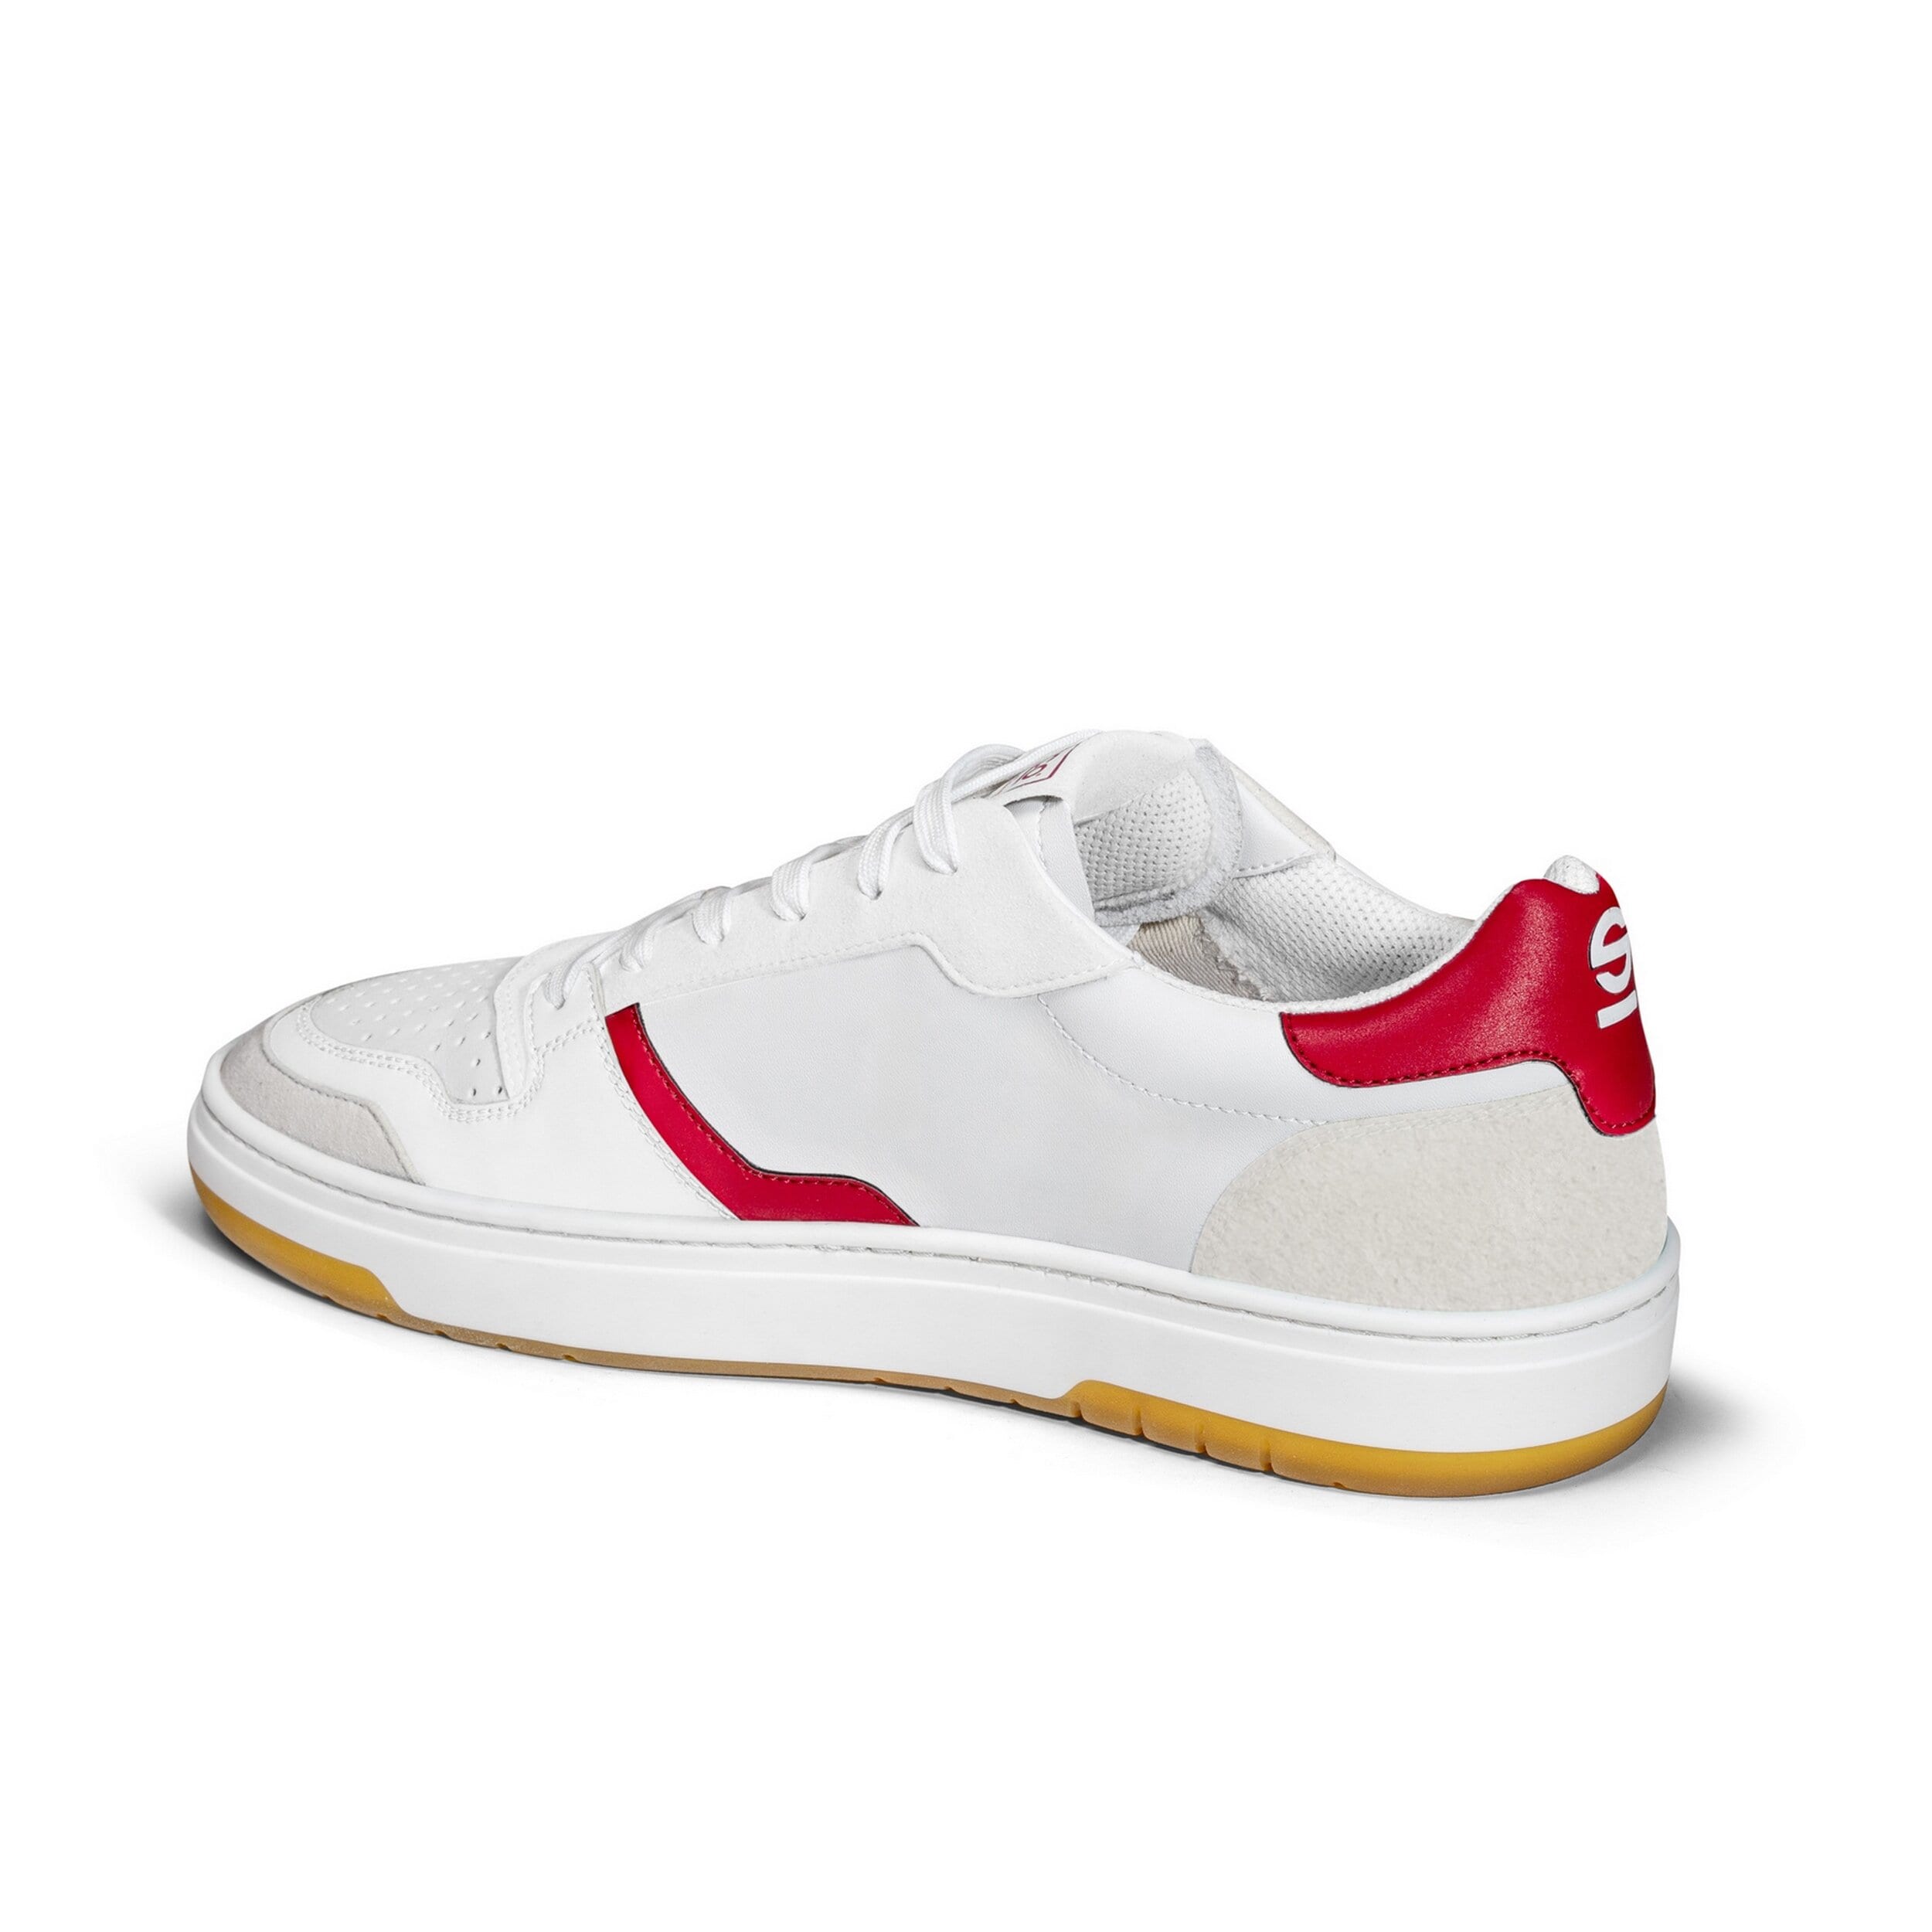 Shoes Sparco S-Urban White/Red